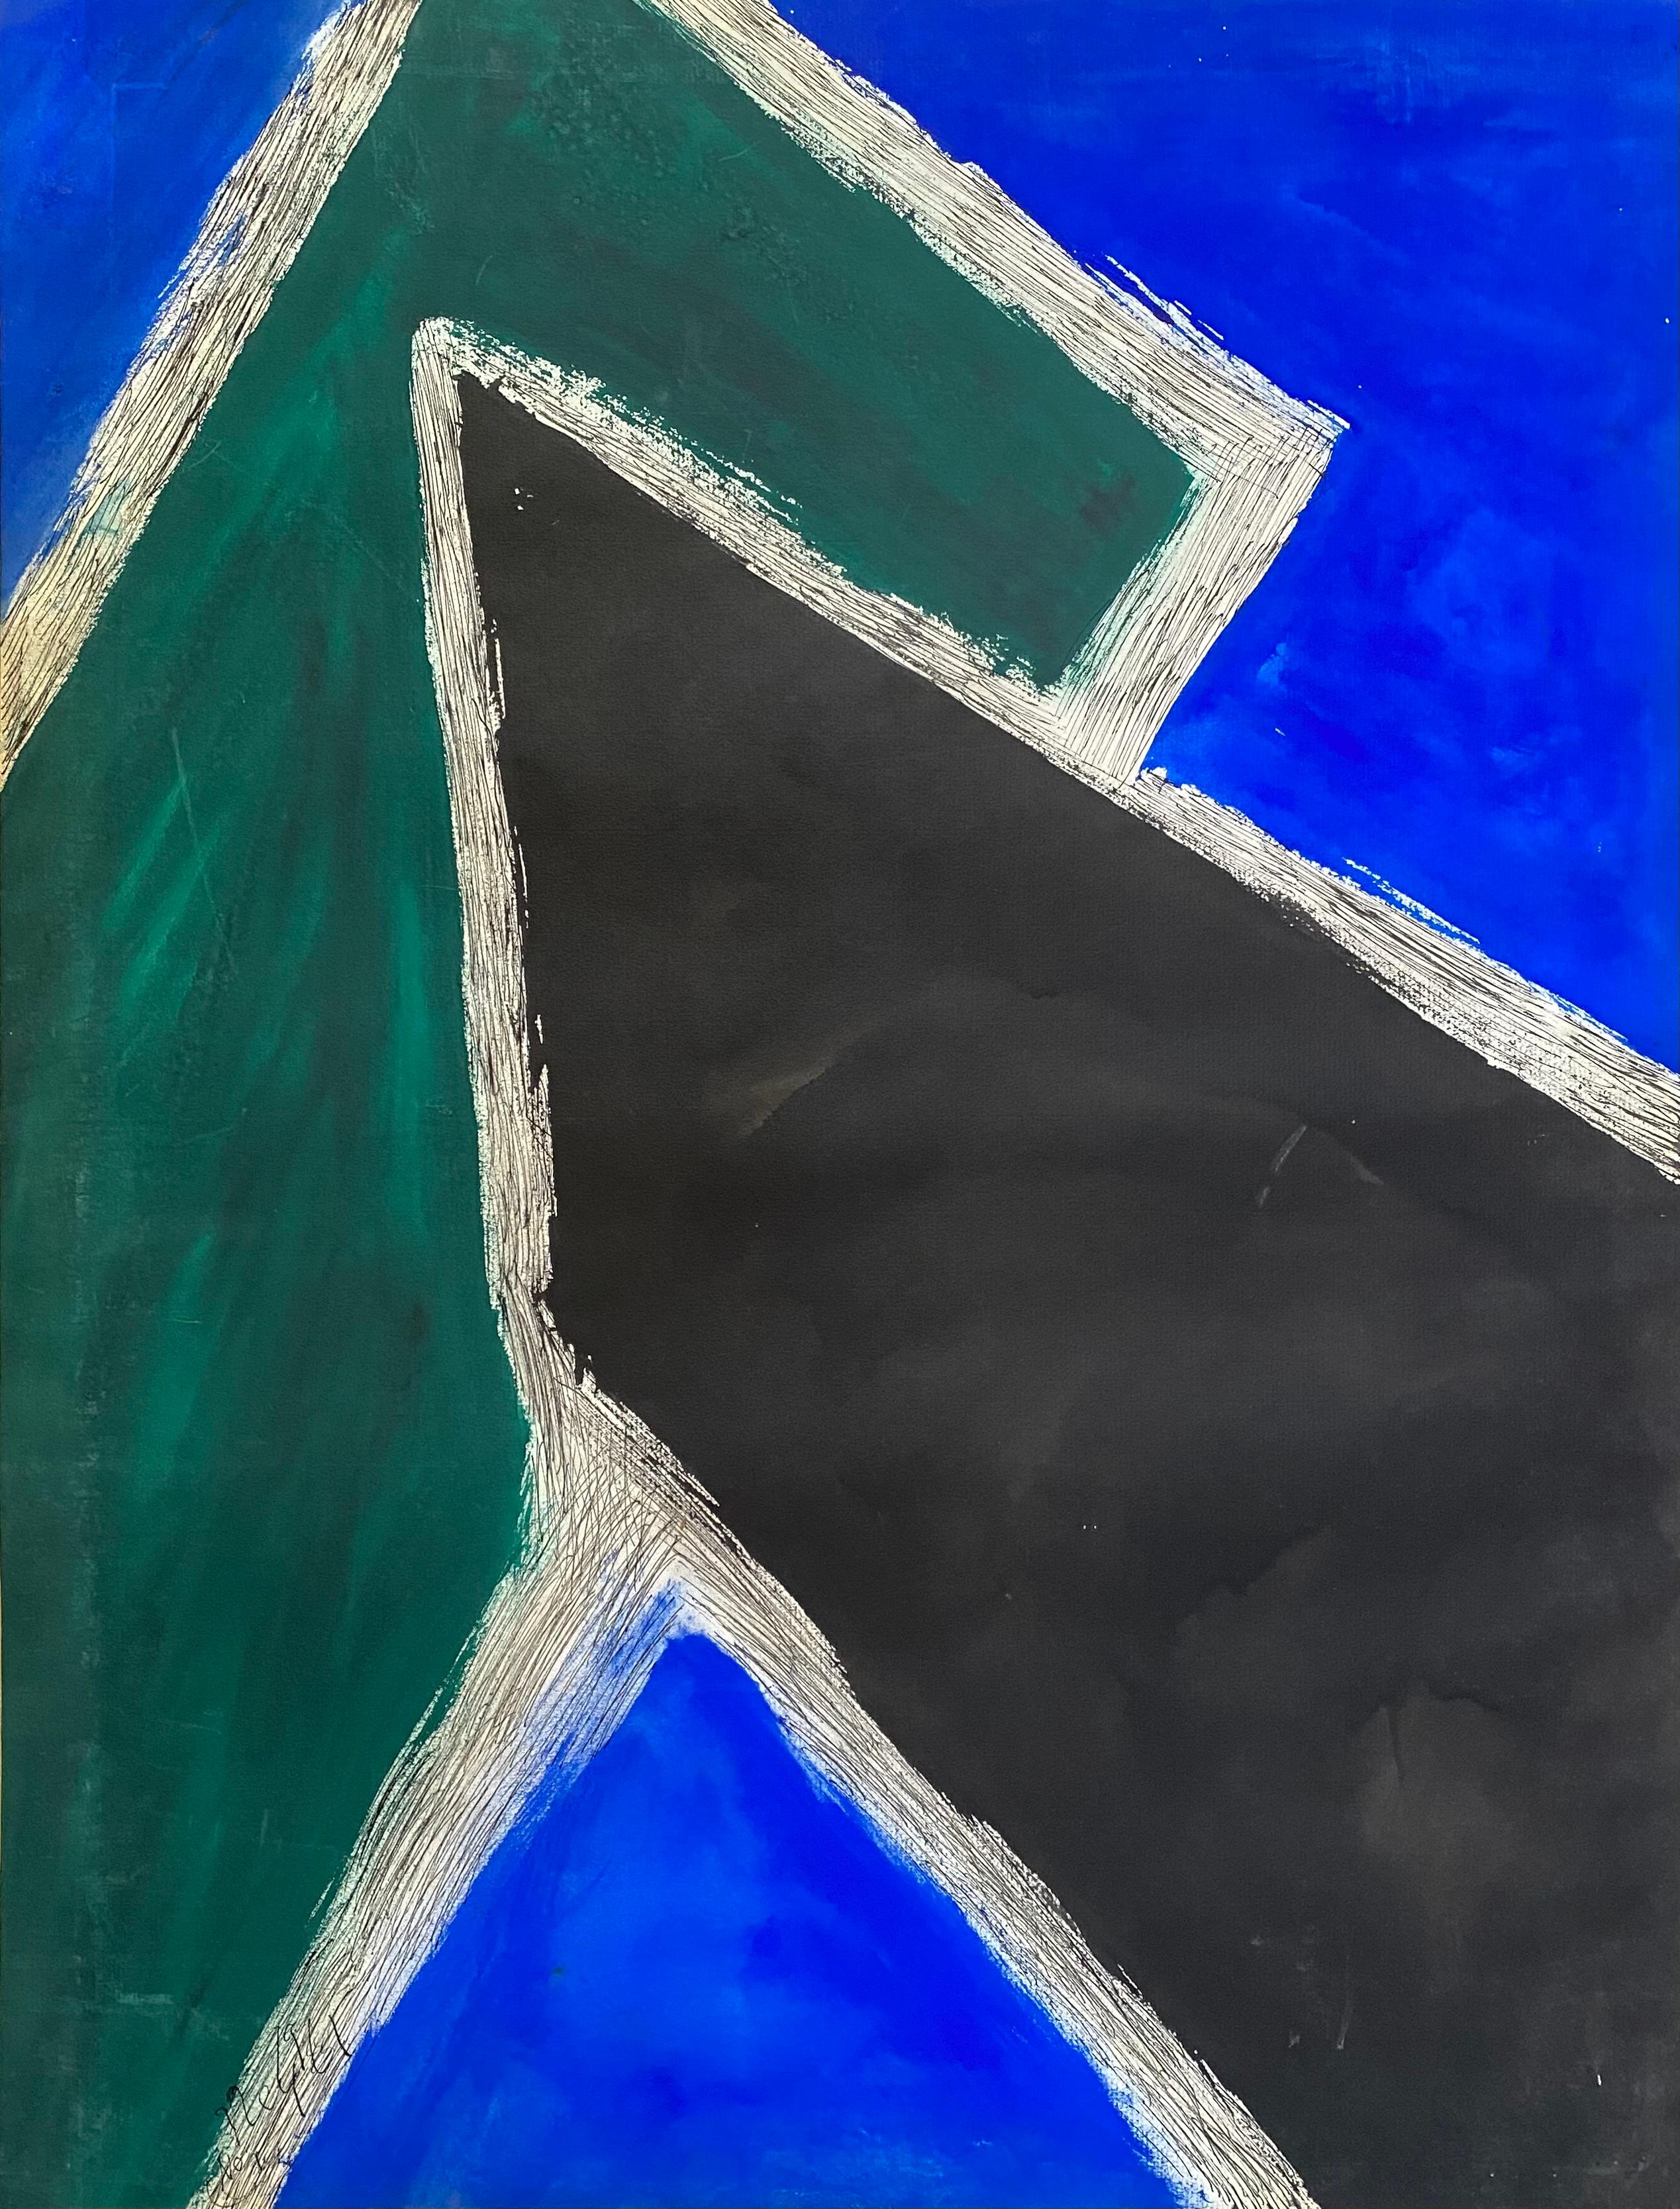 “Abstract in Blue, Black and Green”